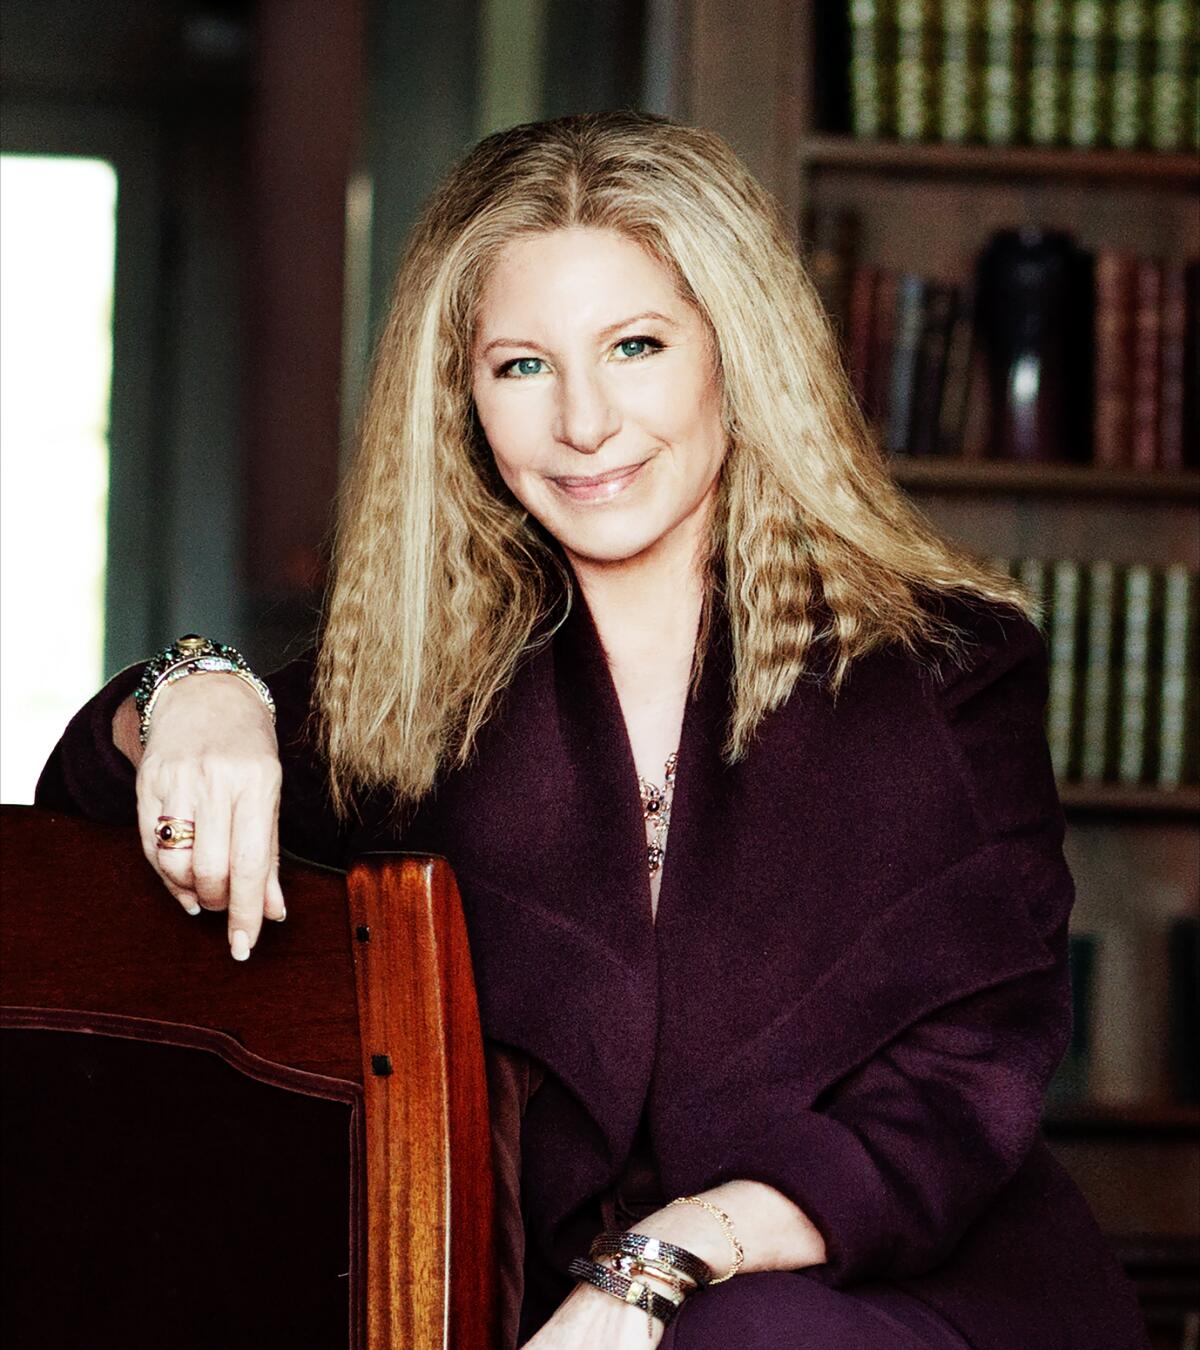 Barbra Streisand rests her arm on the back of the wooden chair she is sitting in for a portrait.